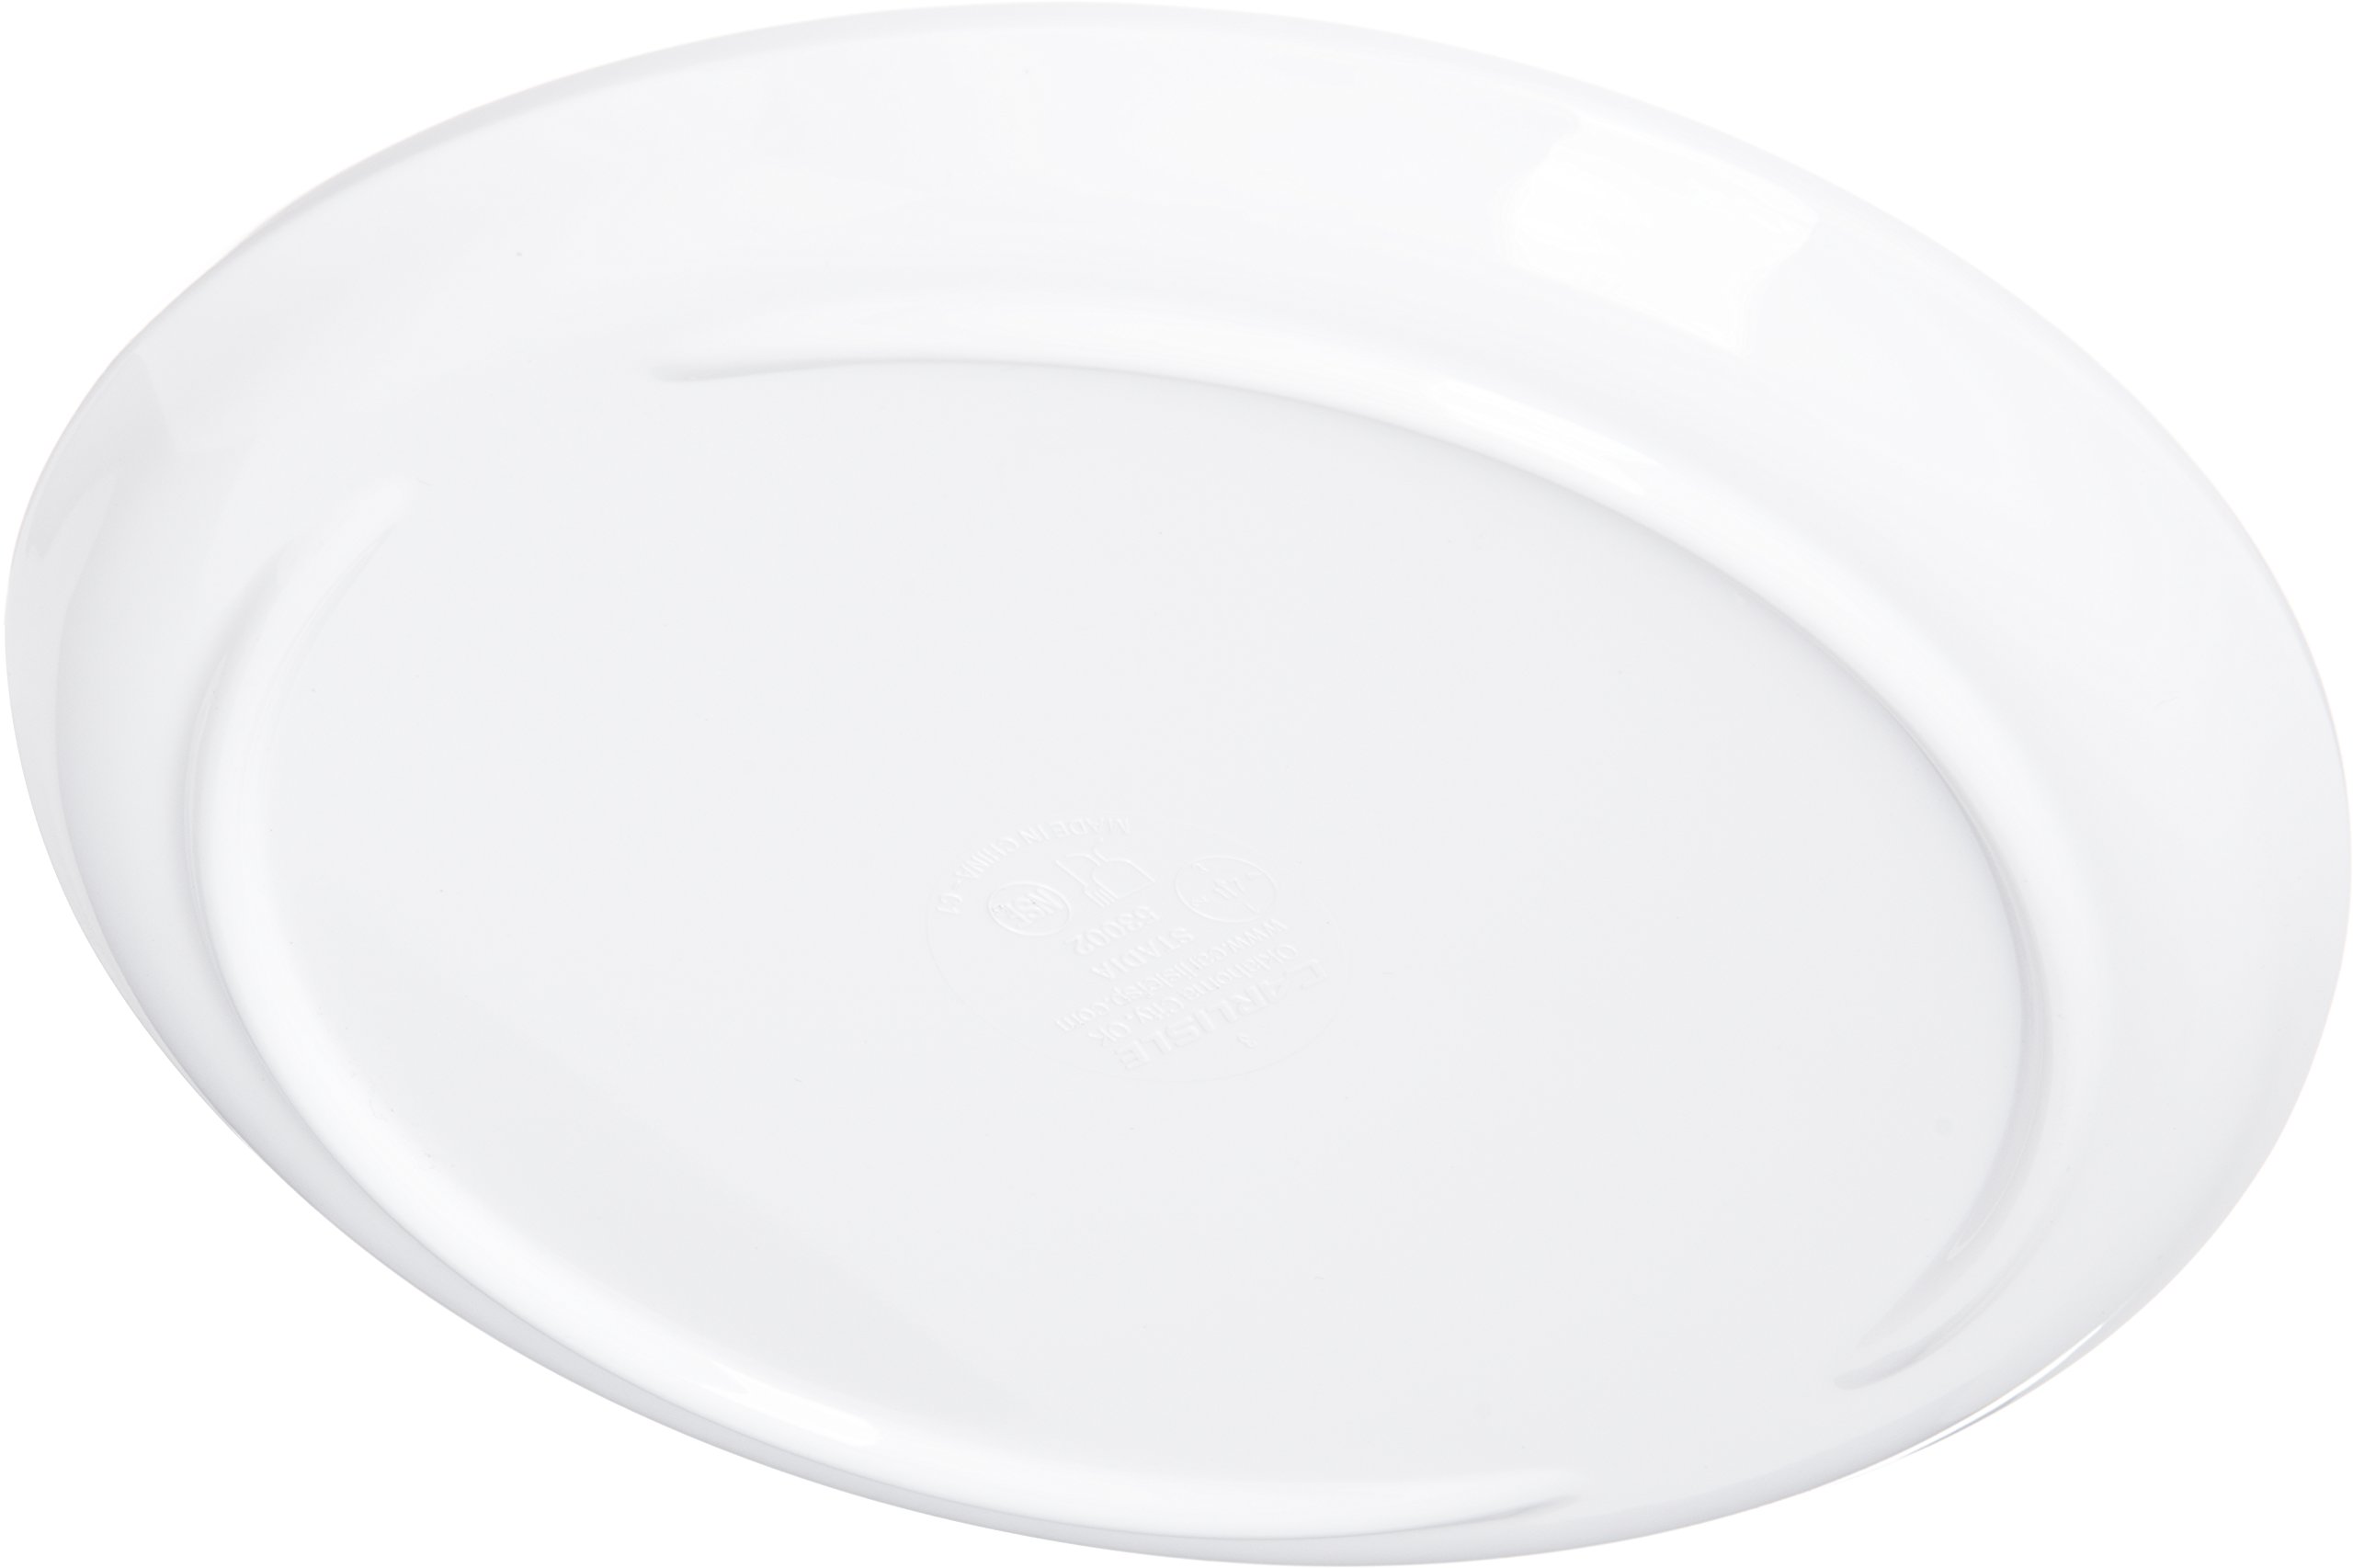 Carlisle FoodService Products Stadia Reusable Plastic Plate Appetizer Plate for Home and Restaurant, Melamine, 7.25 Inches, White